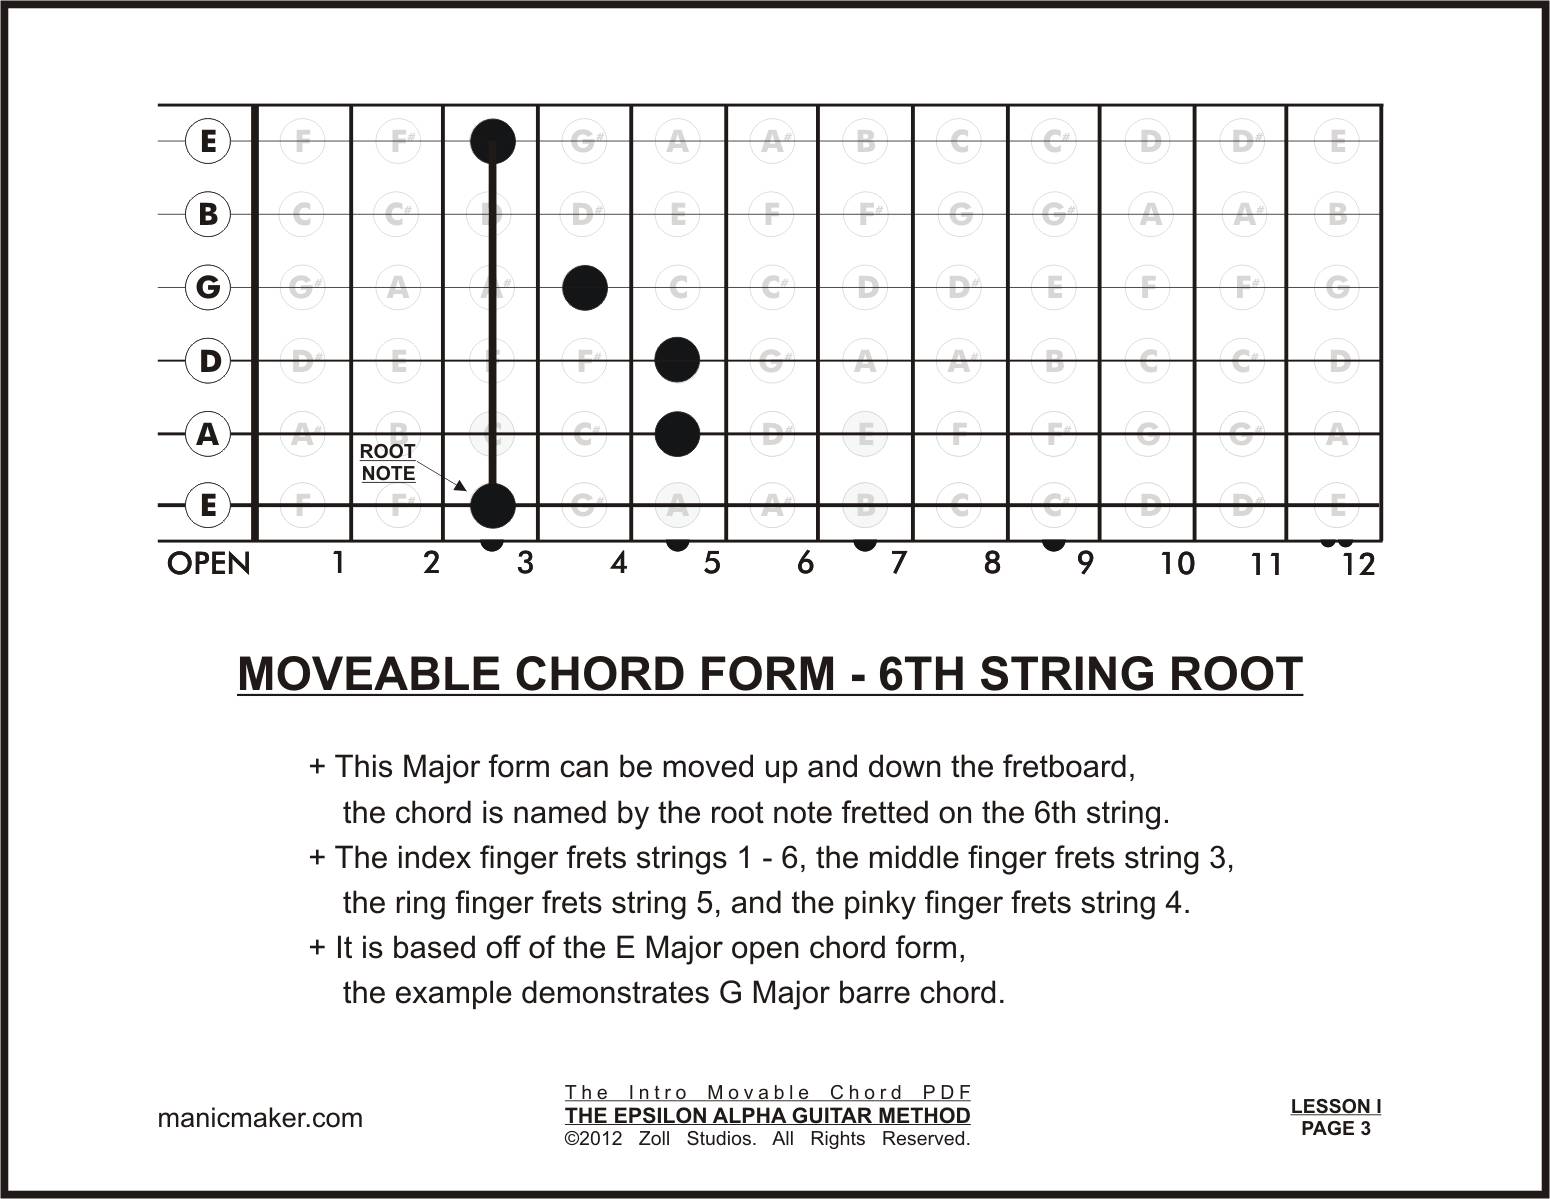 ©2012 Zoll Studios. Movable Guitar Chords - Introduction PDF 